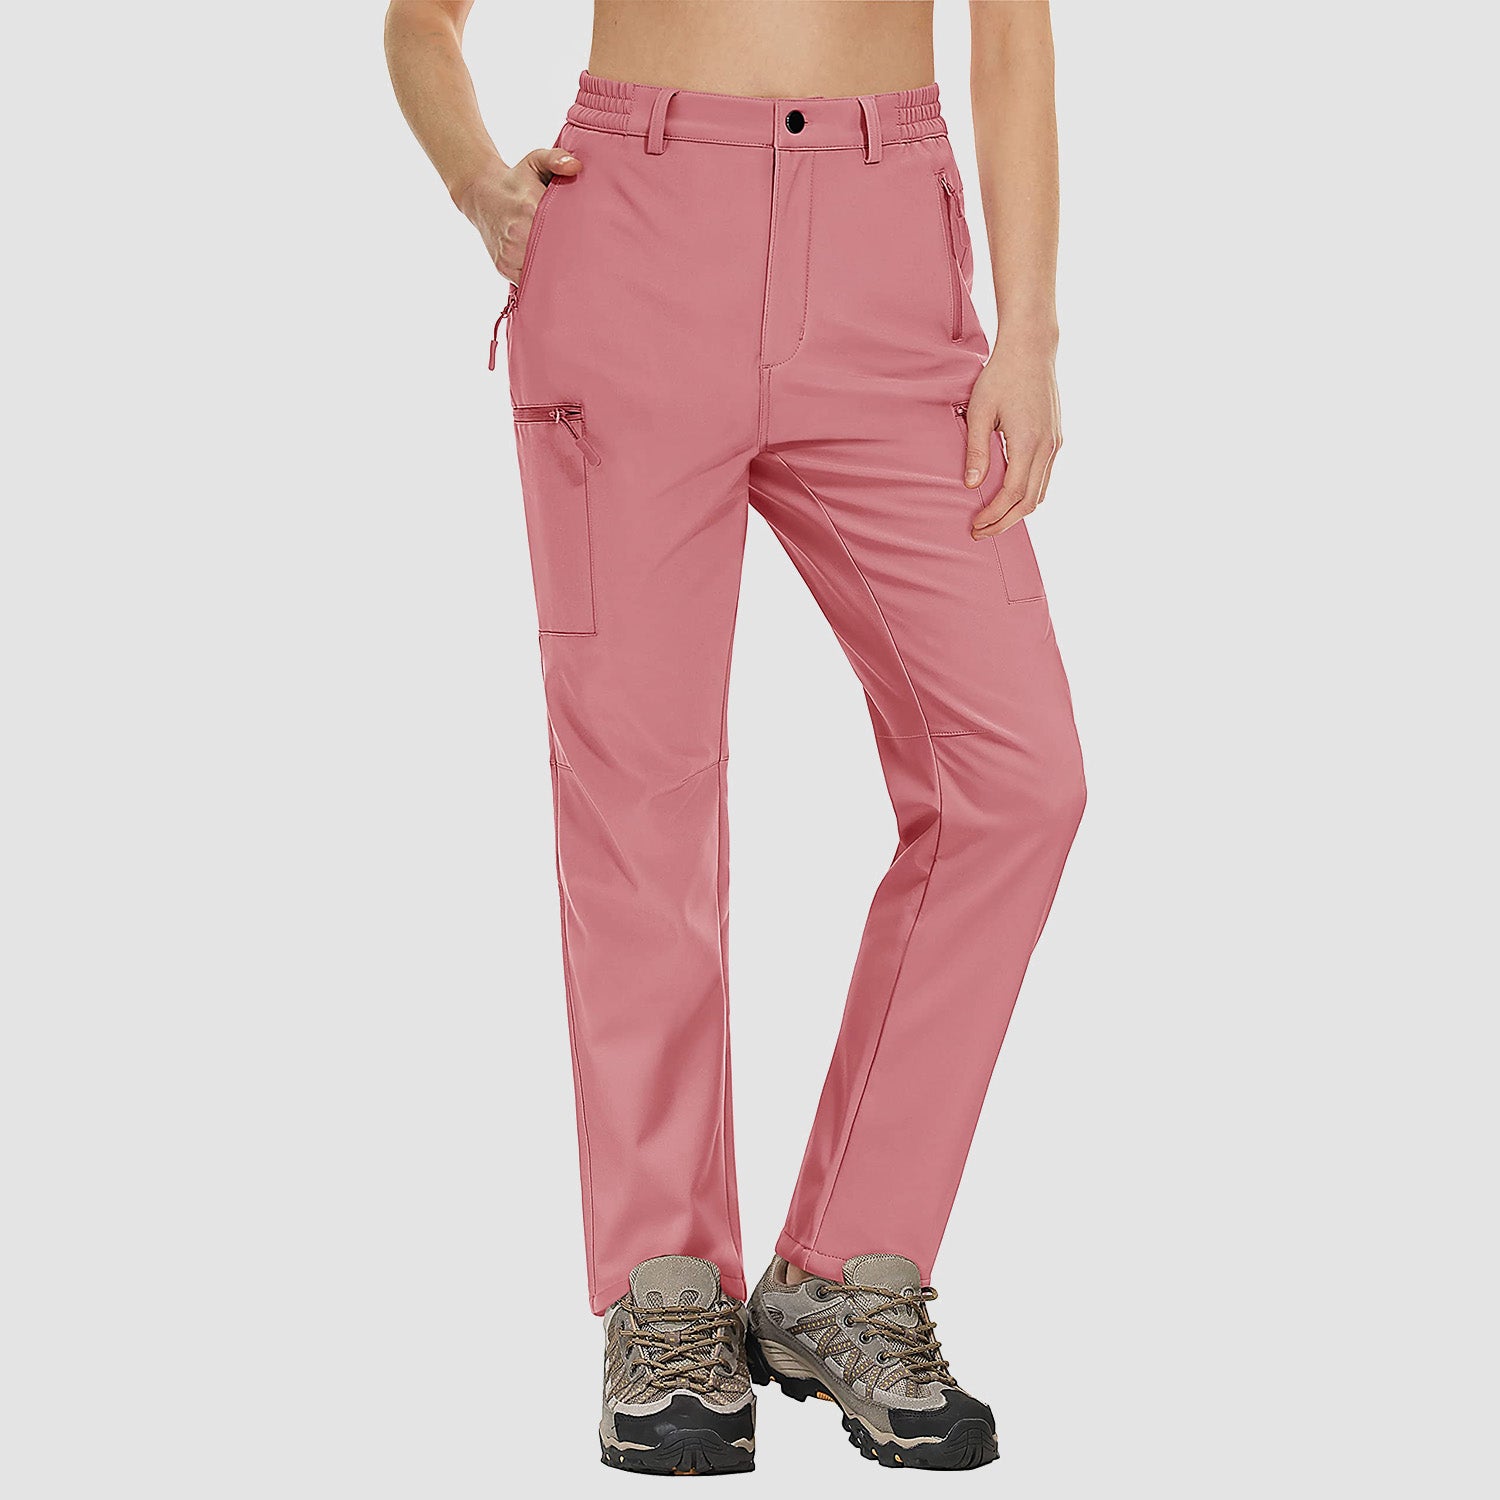 Women's Warm Winter Pants Sherpa Lined Athletic Sweatpants Jogger Pant –  MAGCOMSEN